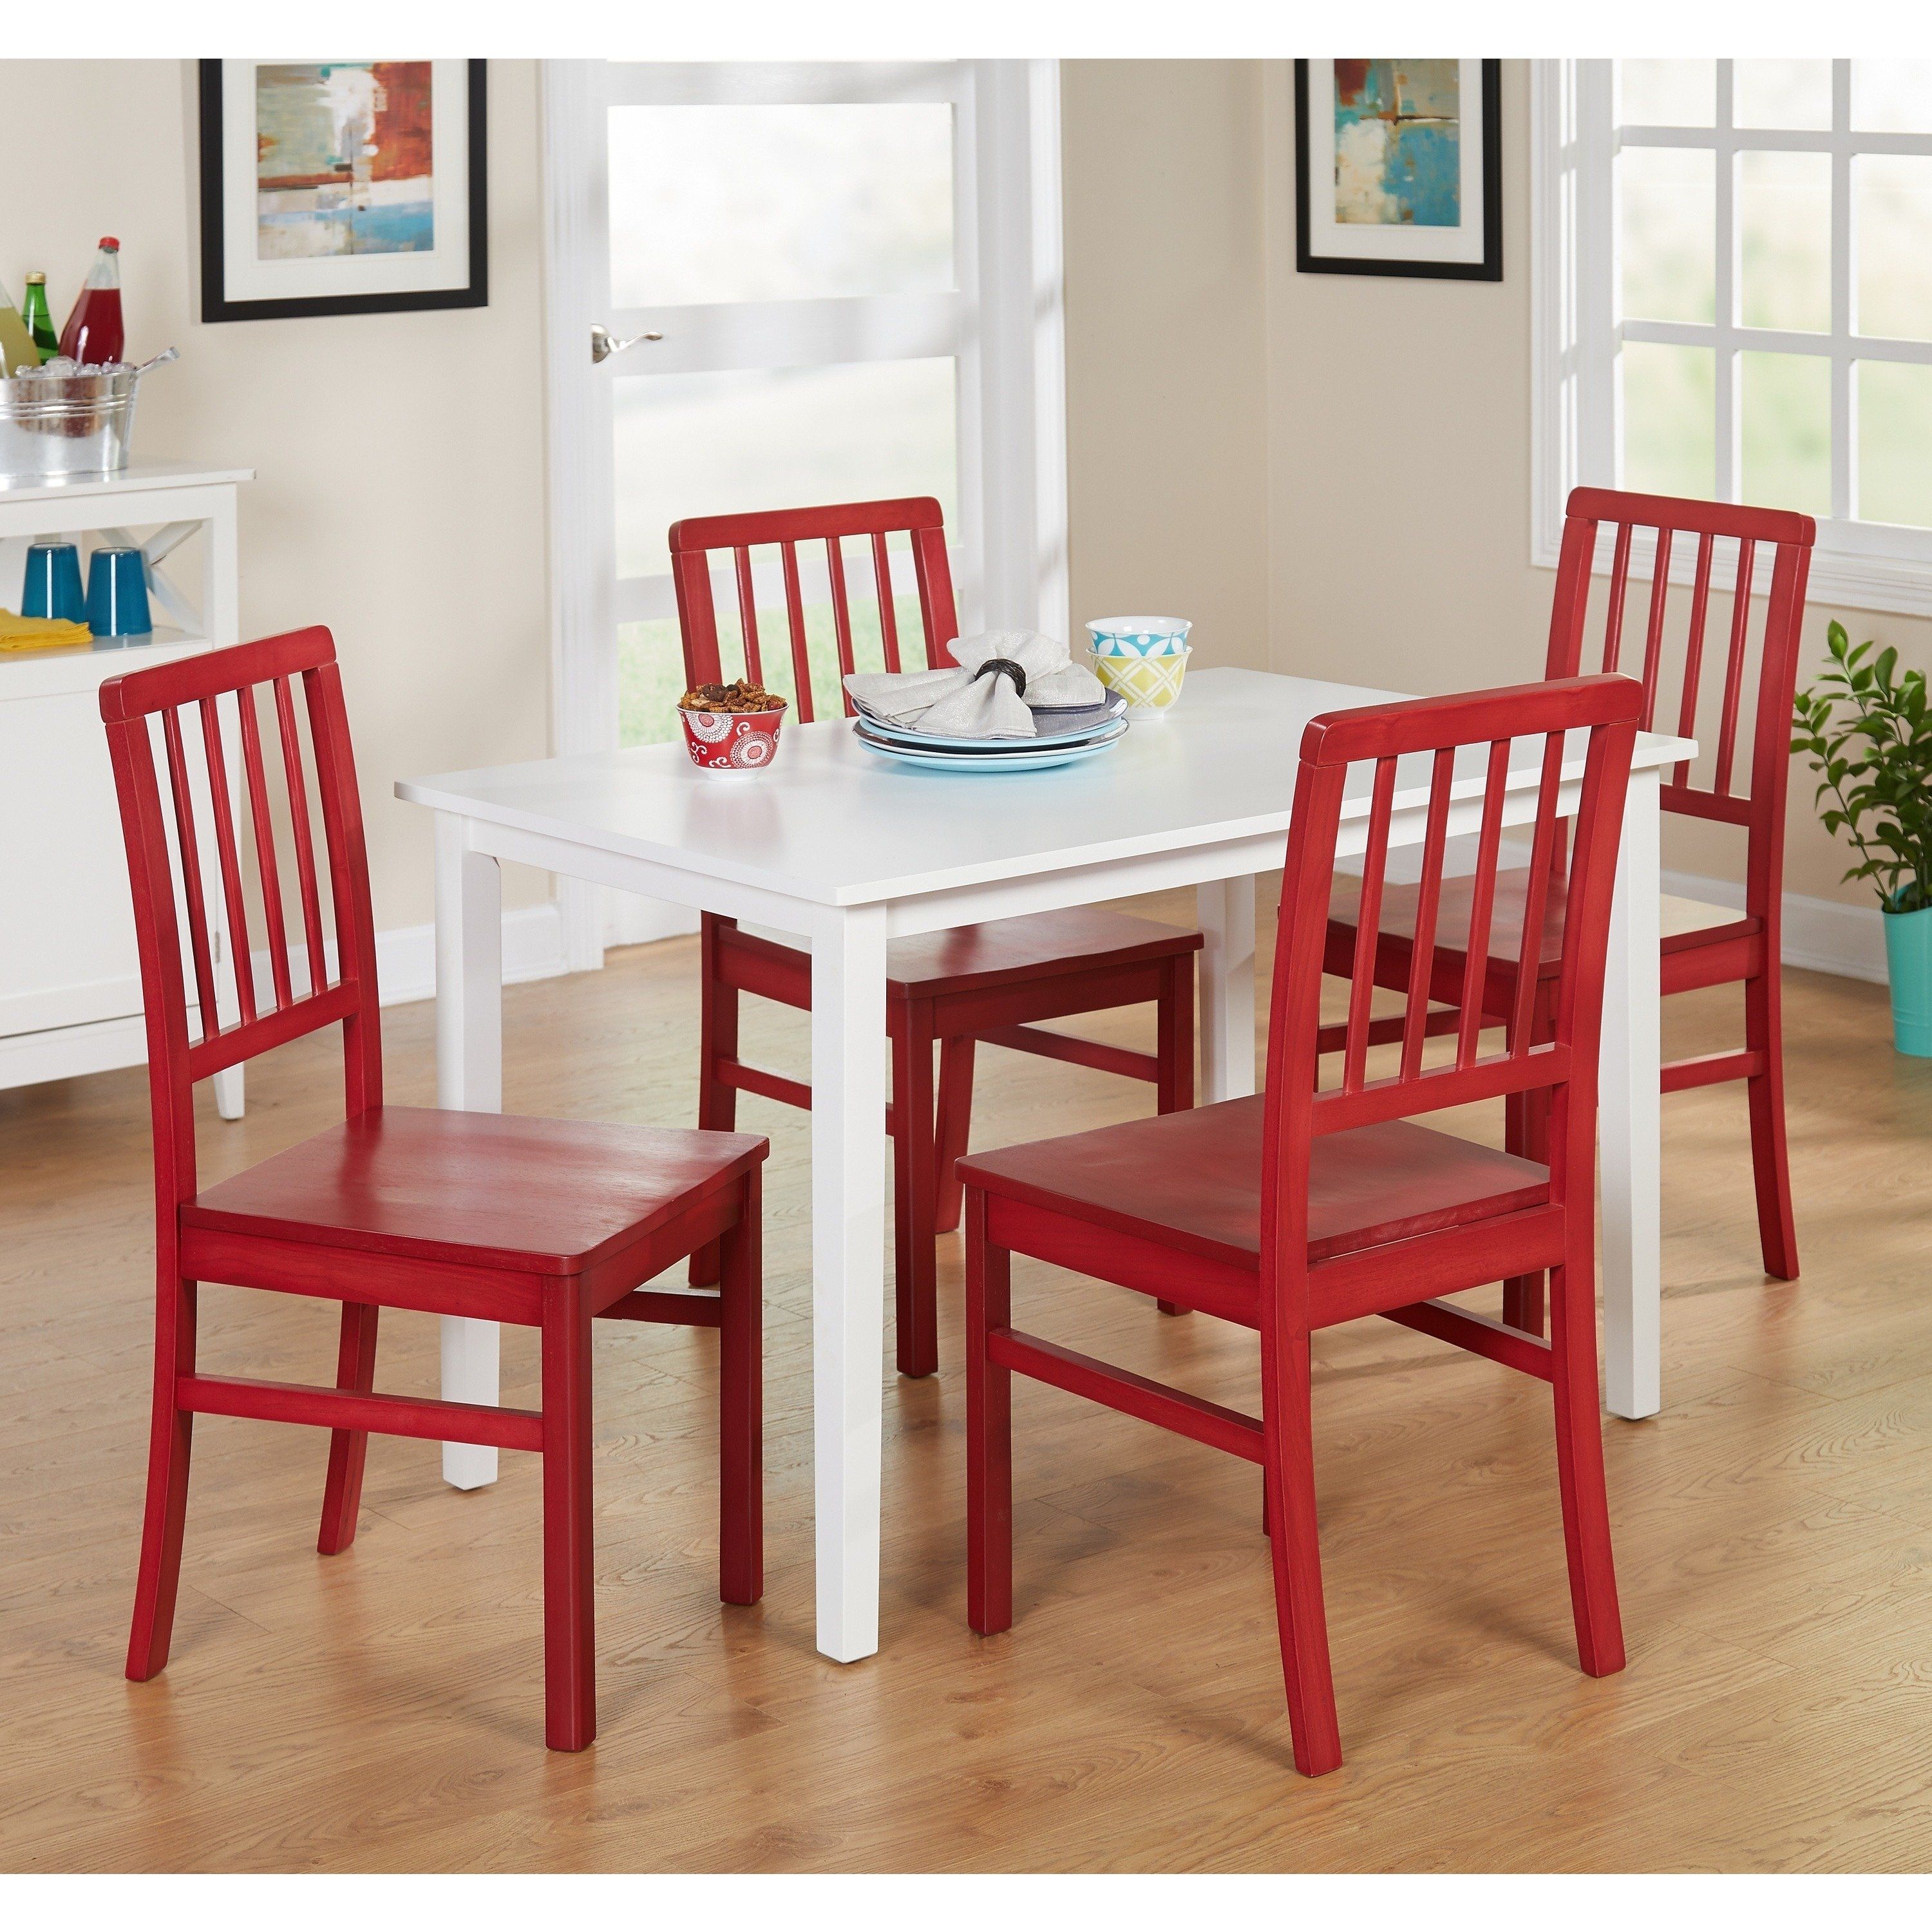 Preferred Camden Dining Chairs Pertaining To Shop Simple Living 5 Piece Camden Dining Set – Free Shipping Today (View 20 of 20)